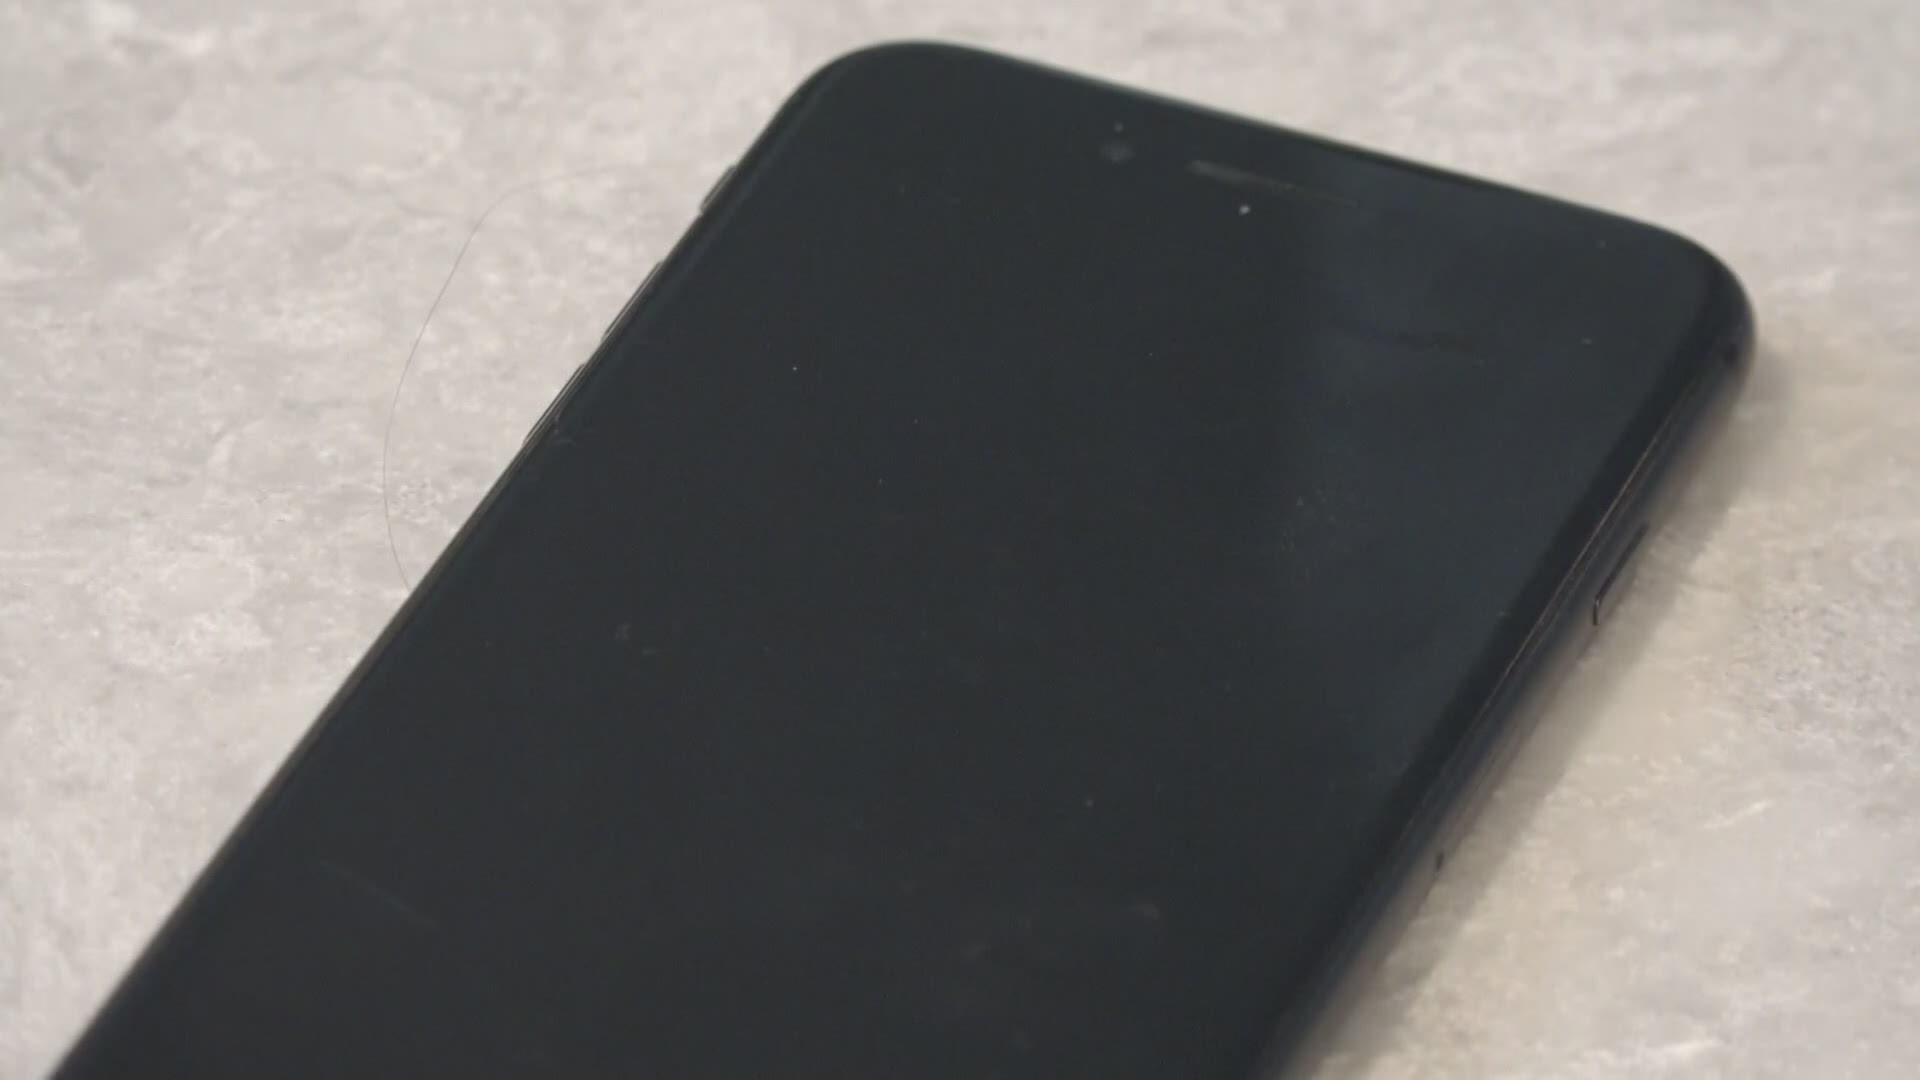 While experts say the best way to stop unwanted calls in to ignore them, Consumer Reports shares ways to block unknown callers right from smart phone settings.